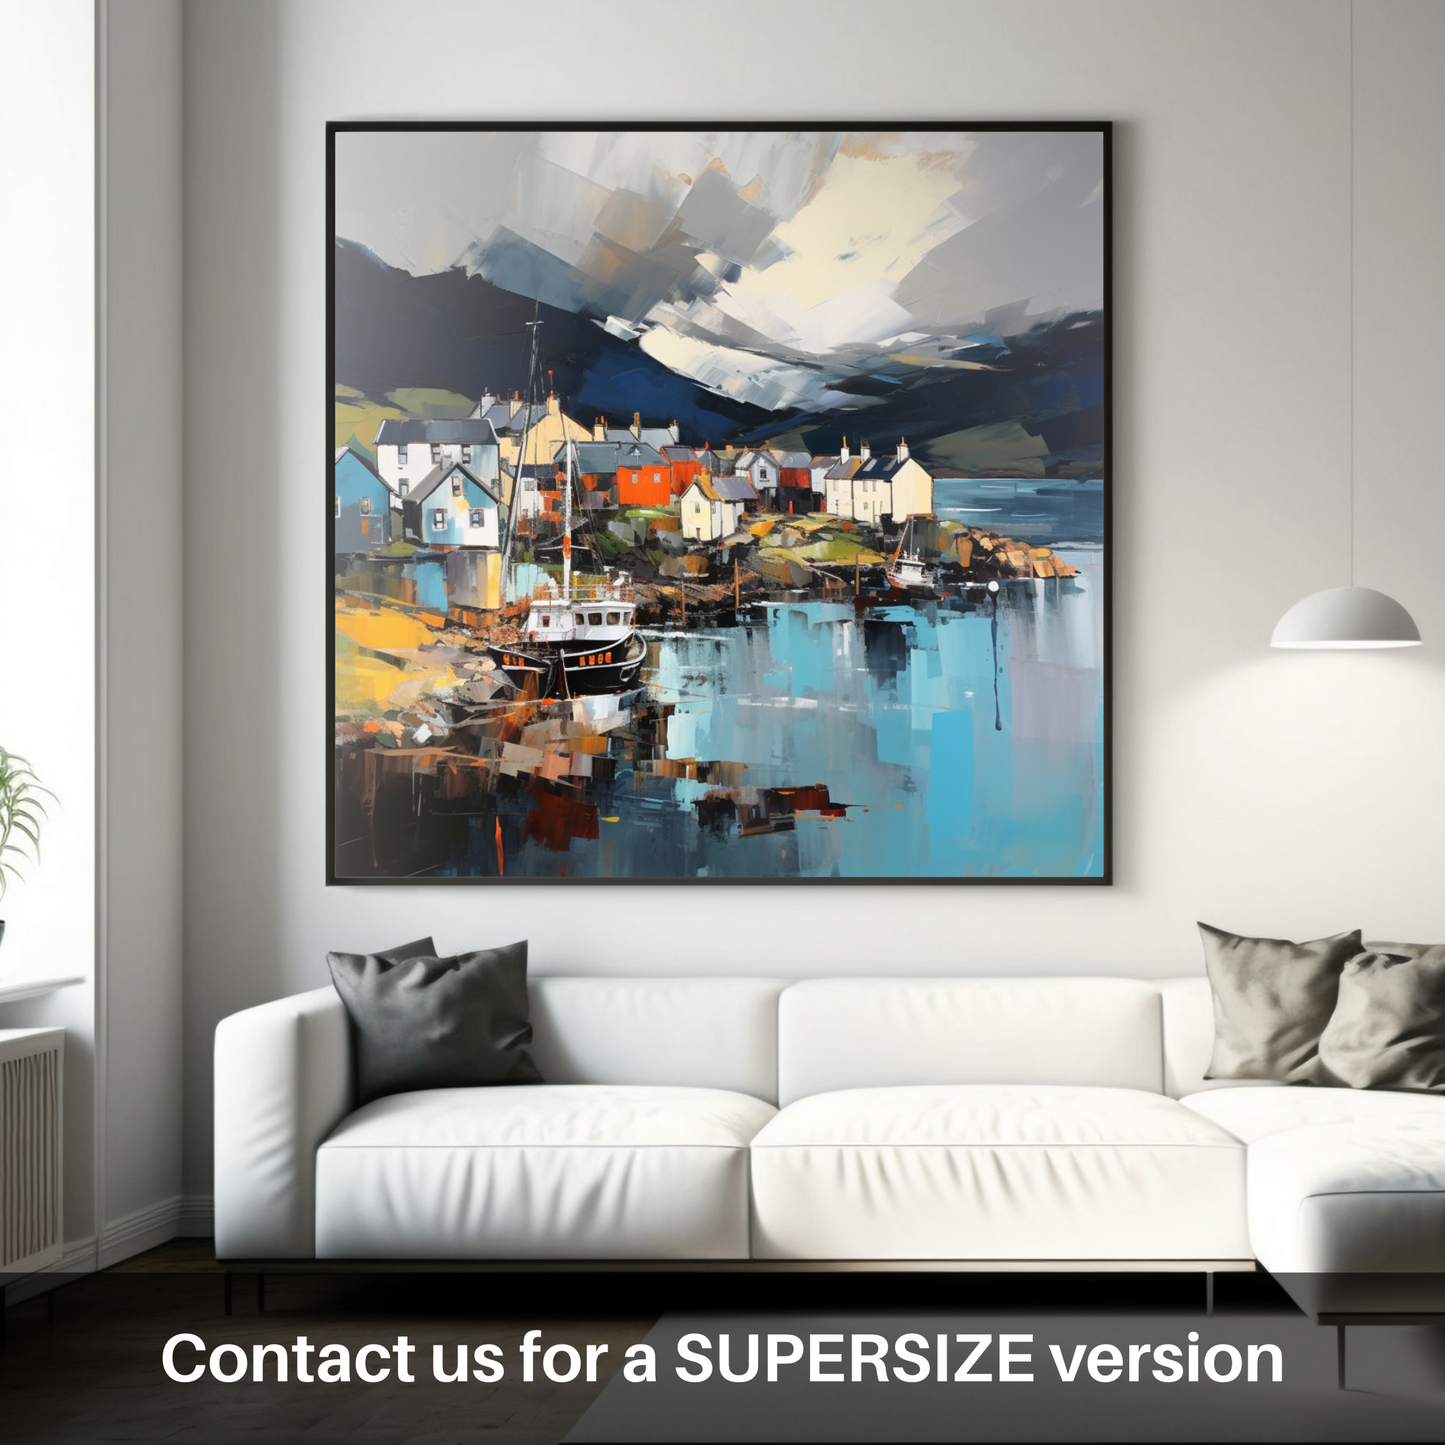 Huge supersize print of Mallaig Harbour with a stormy sky